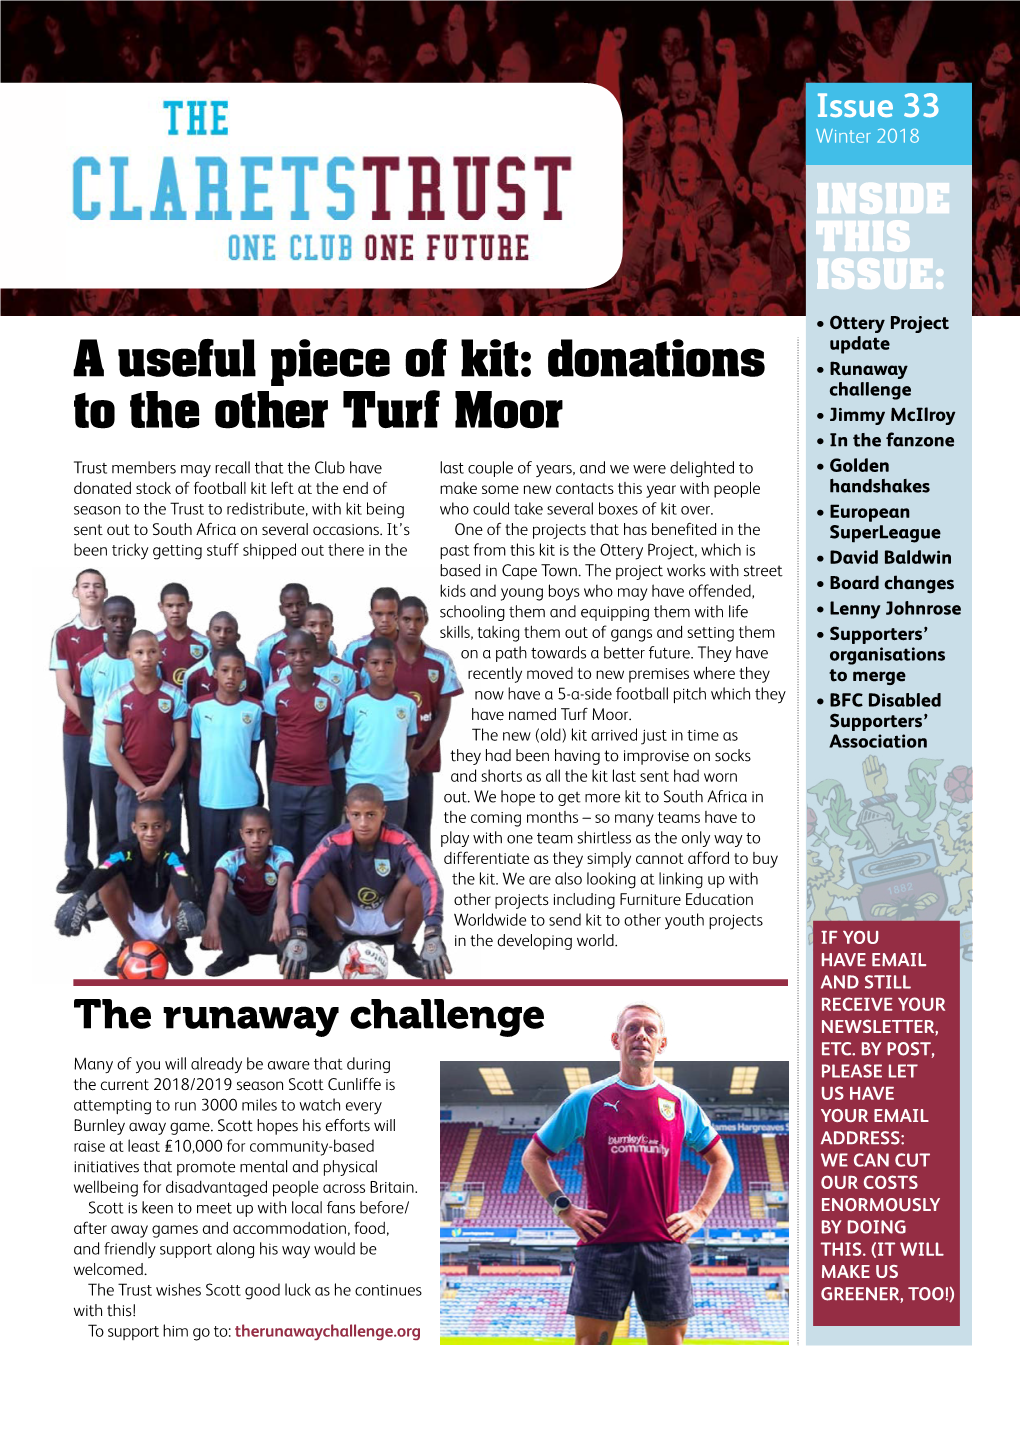 Donations to the Other Turf Moor